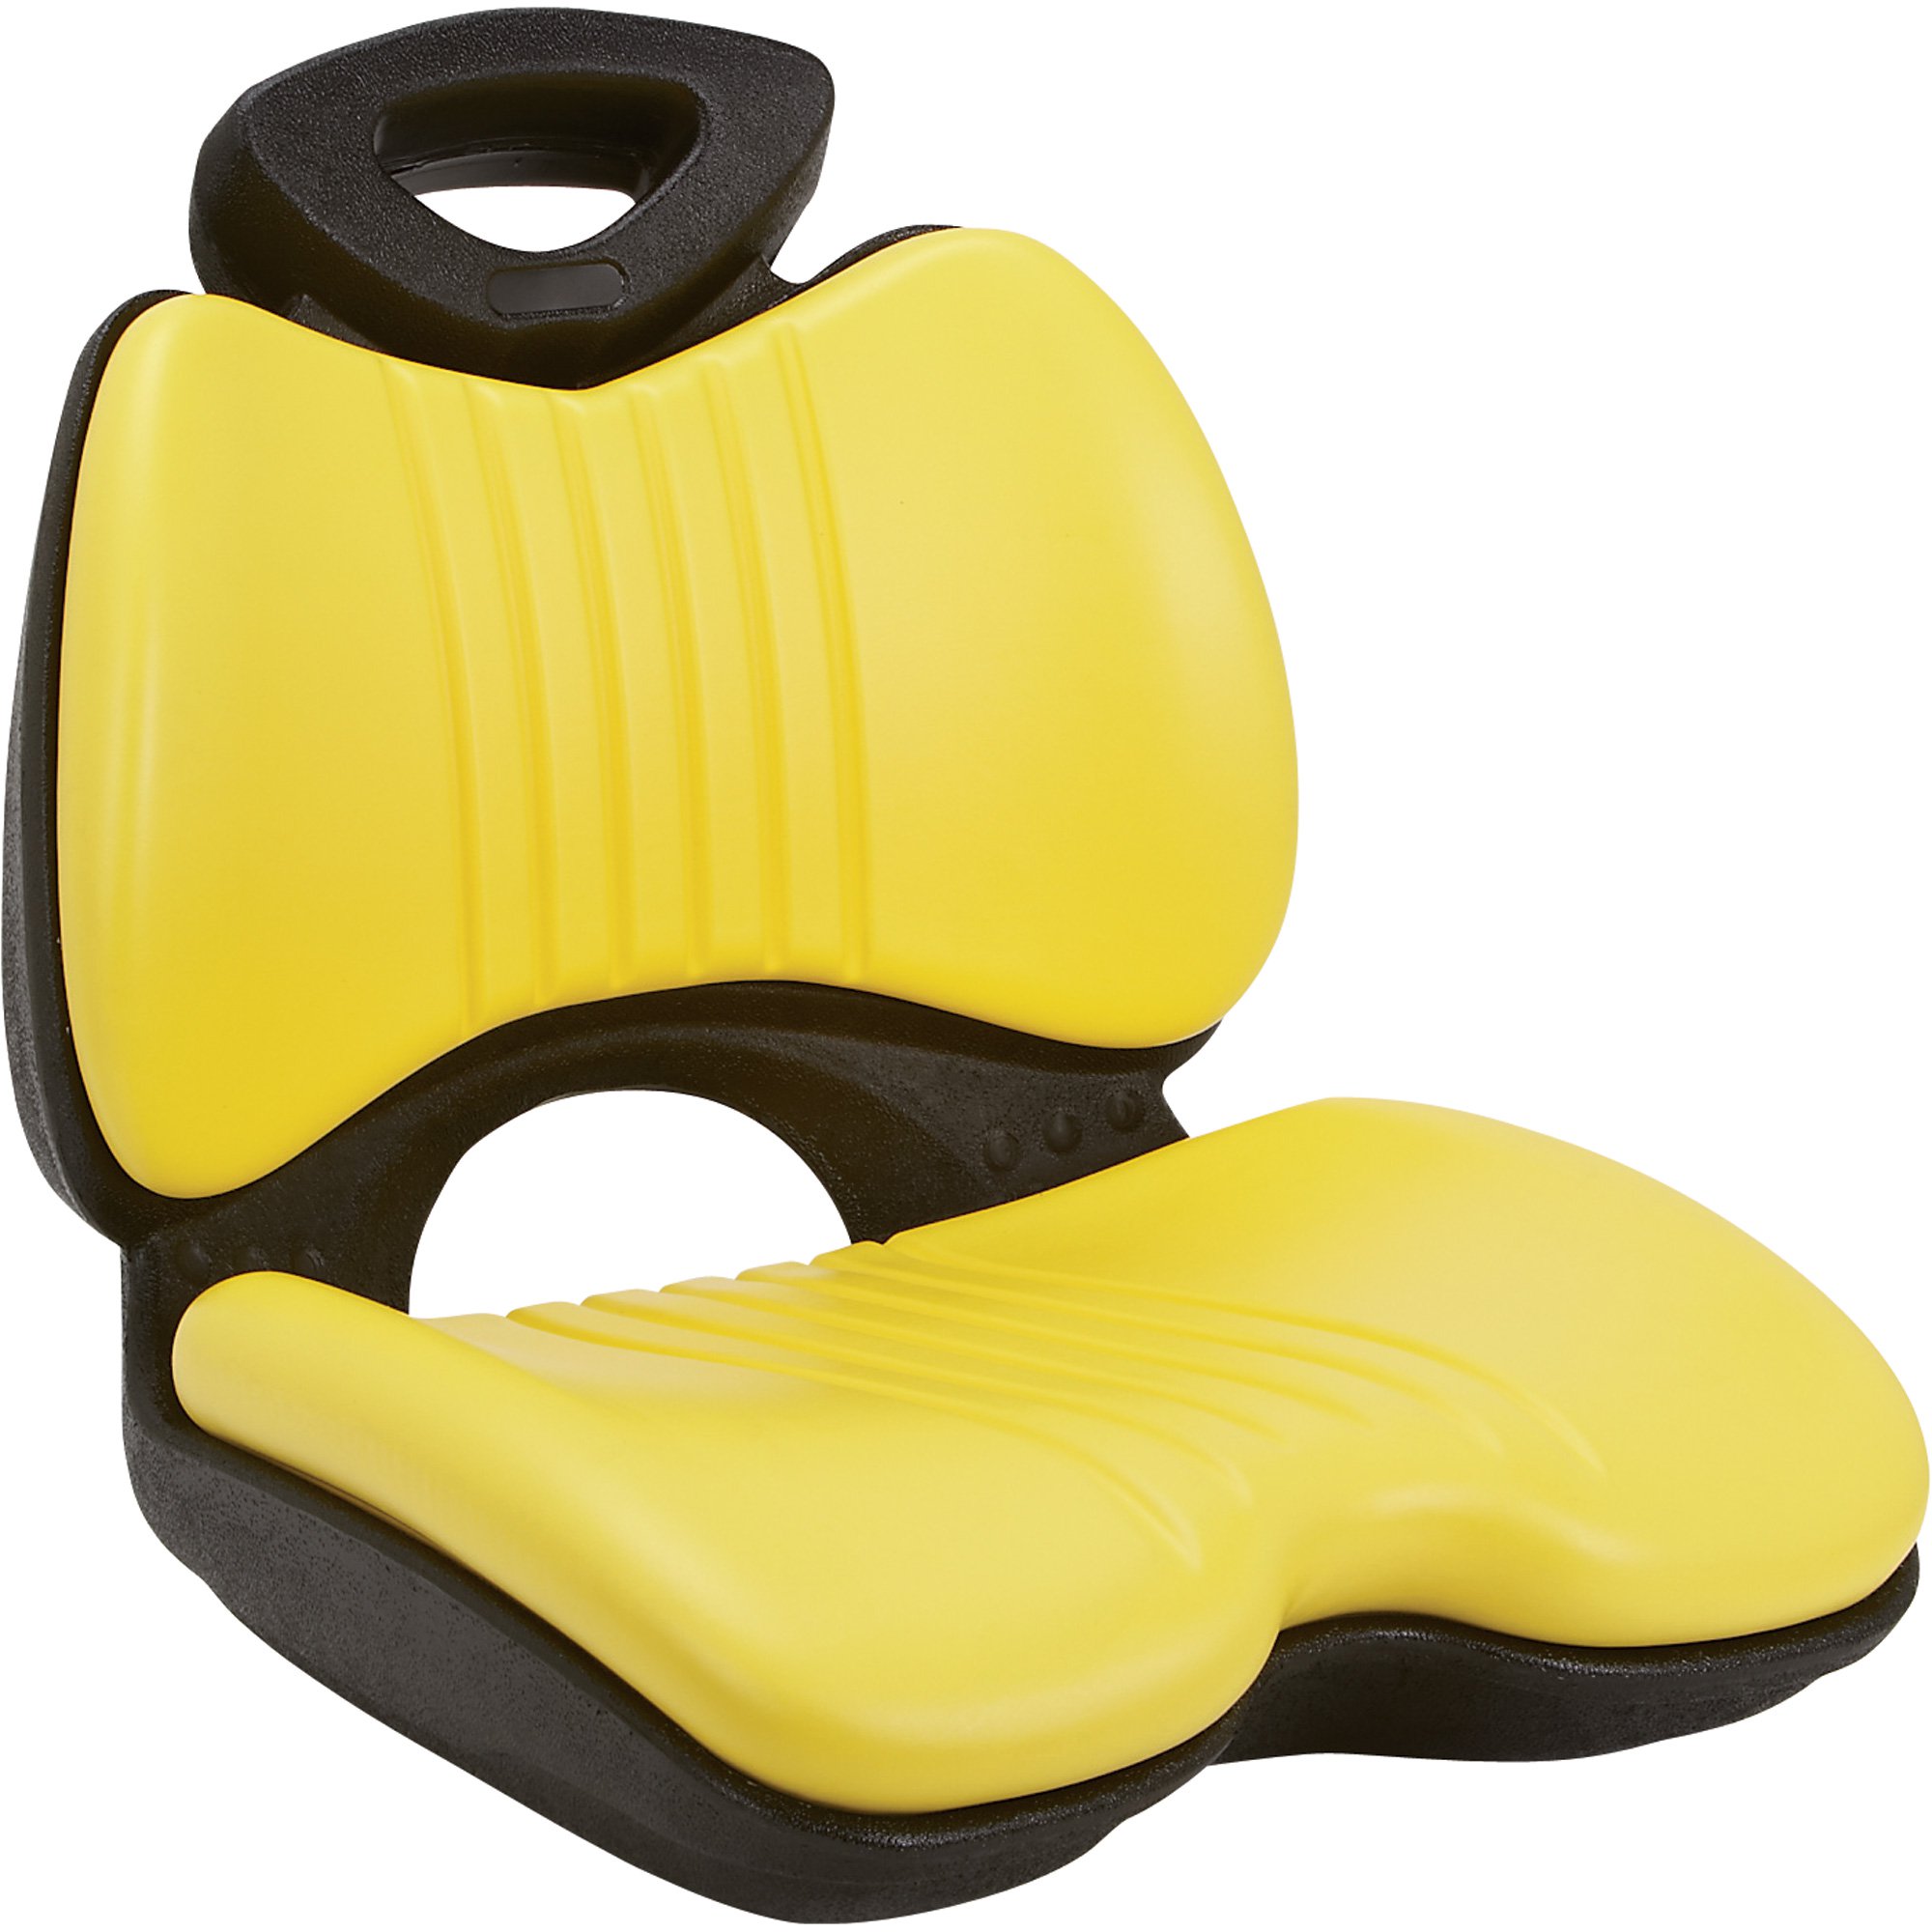 K & M Comfort Formed Lawn/Garden Tractor Seat — Yellow ...